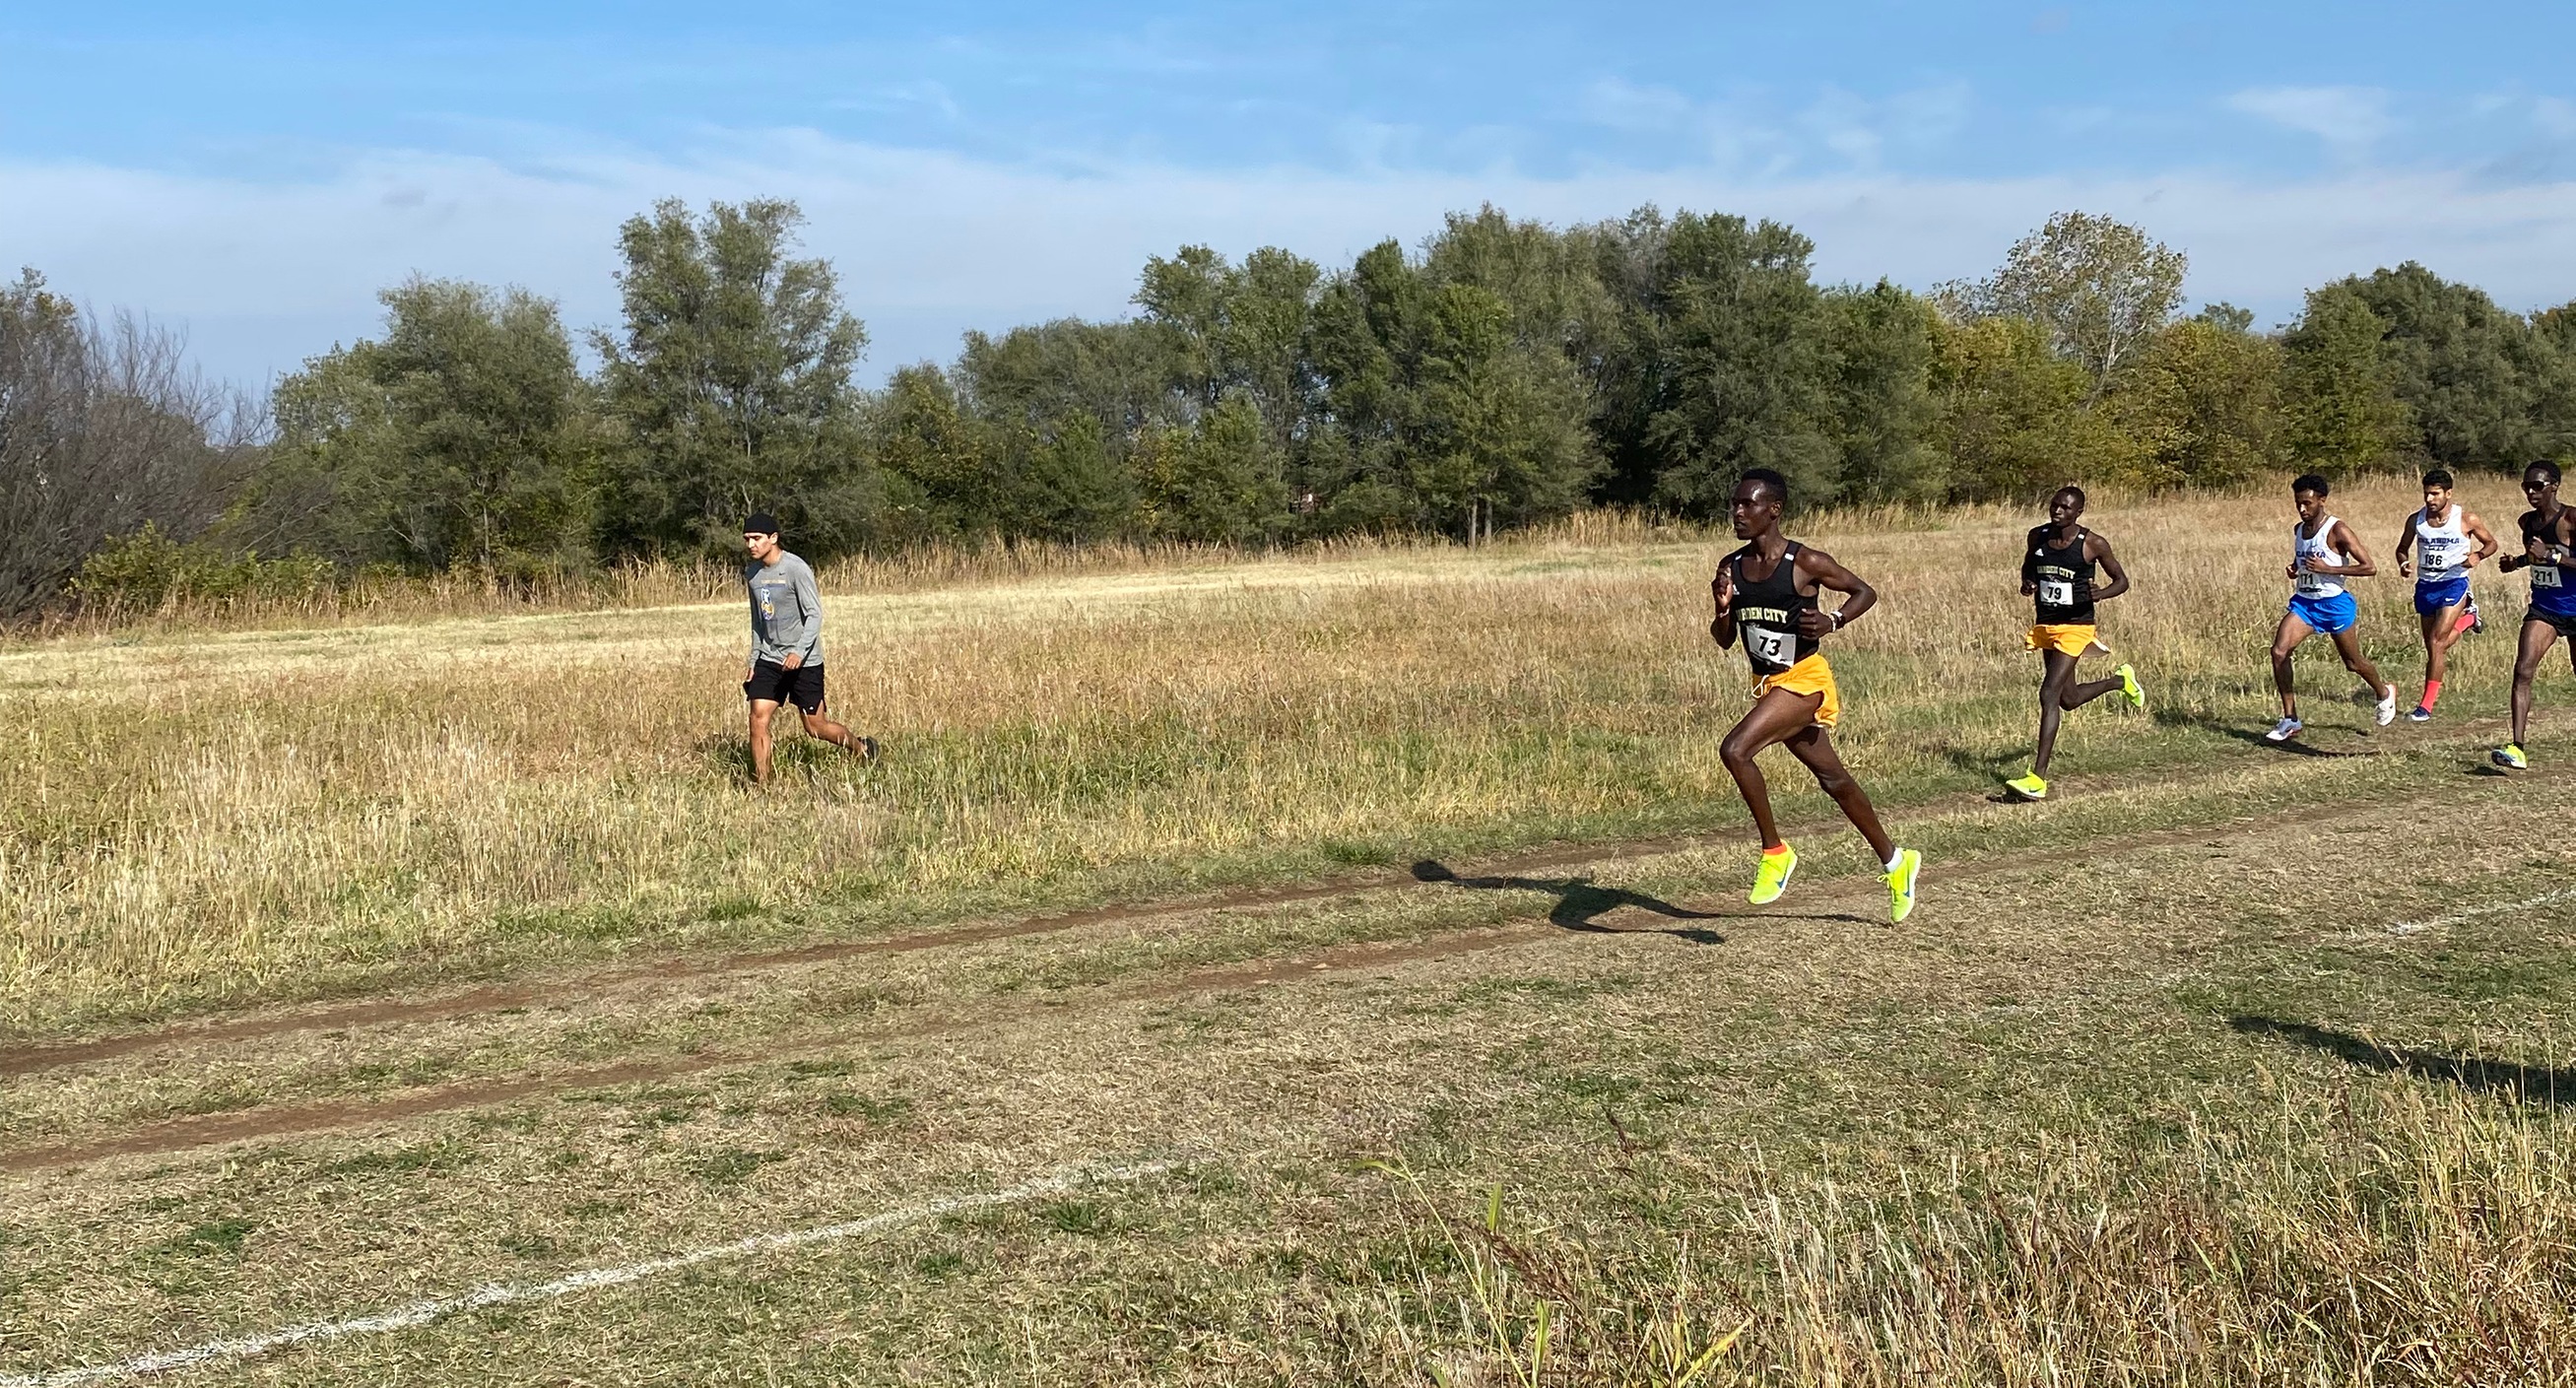 Mutai paces the Broncbusters again